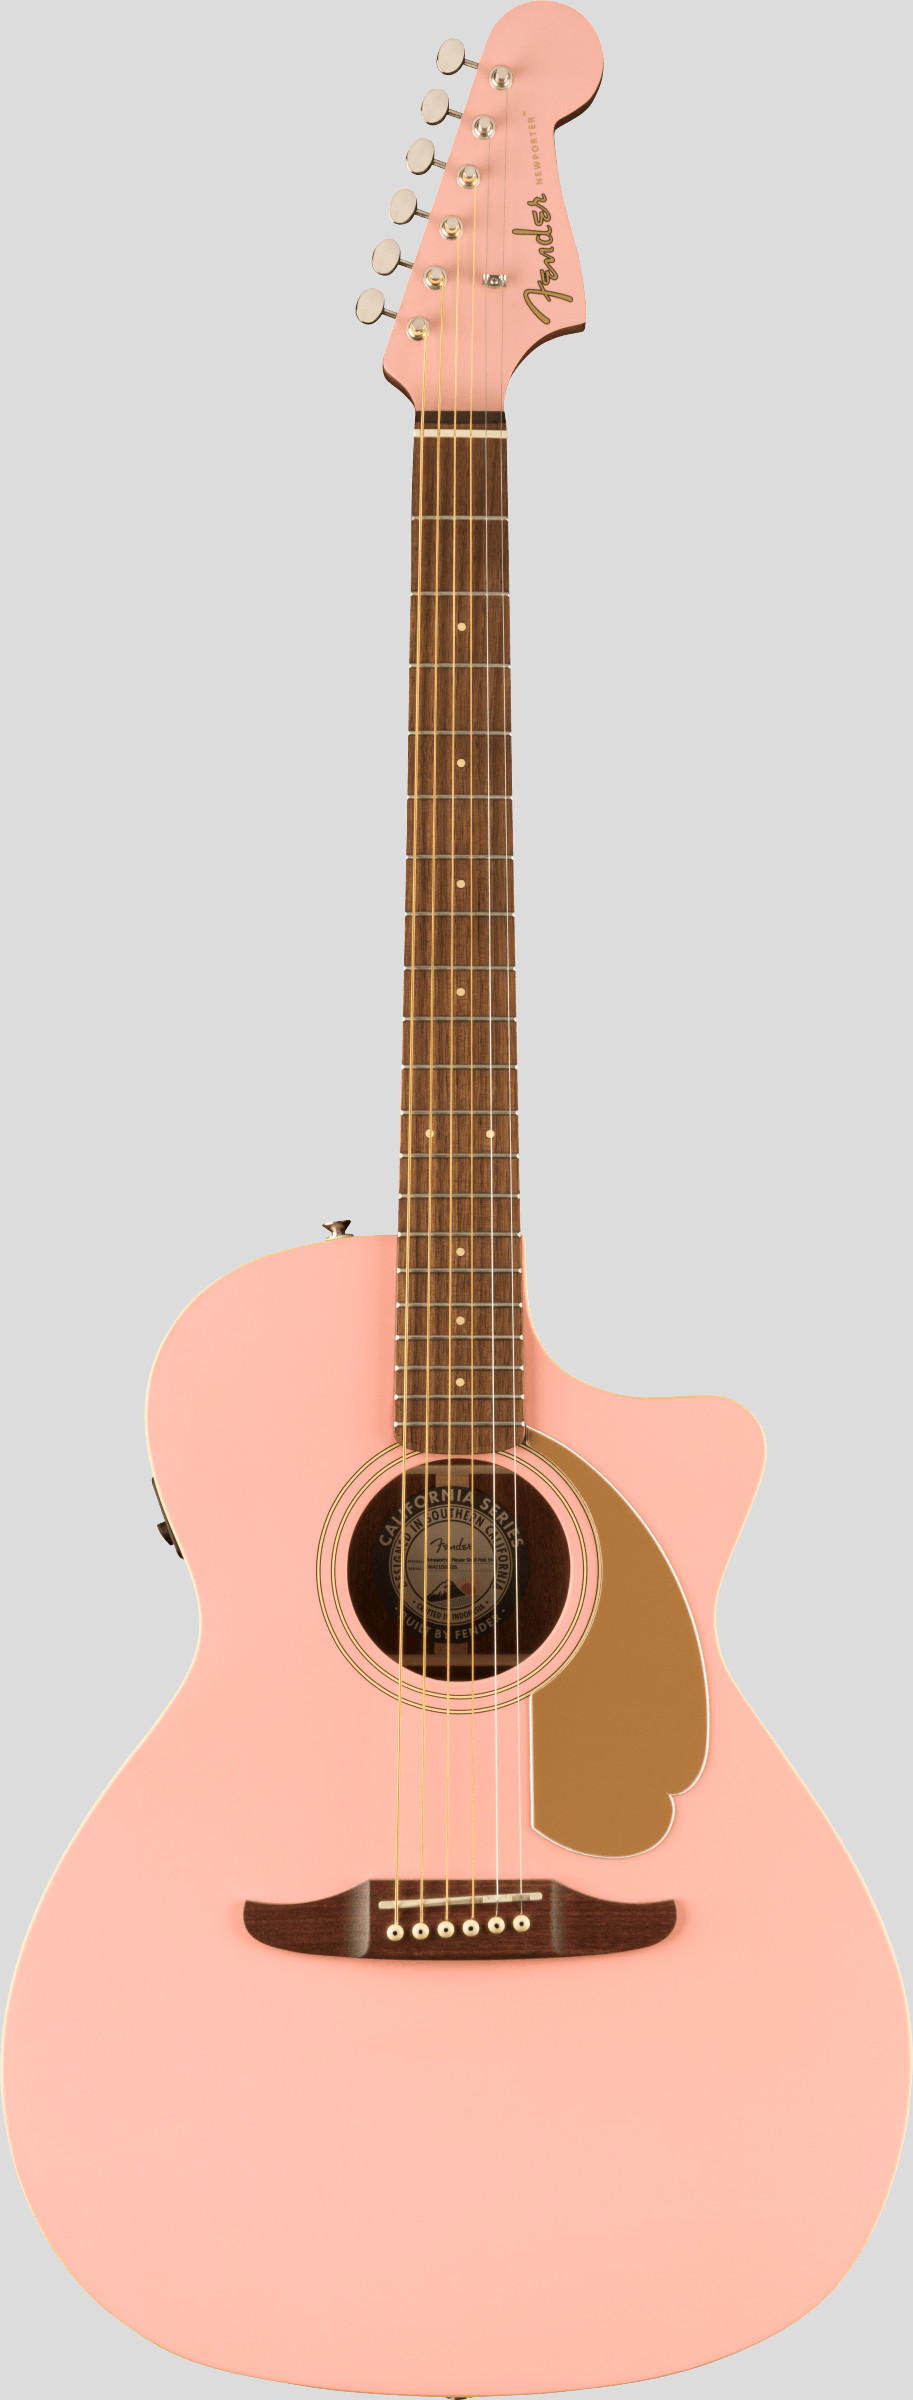 Fender Limited Edition Newporter Player Shell Pink 1